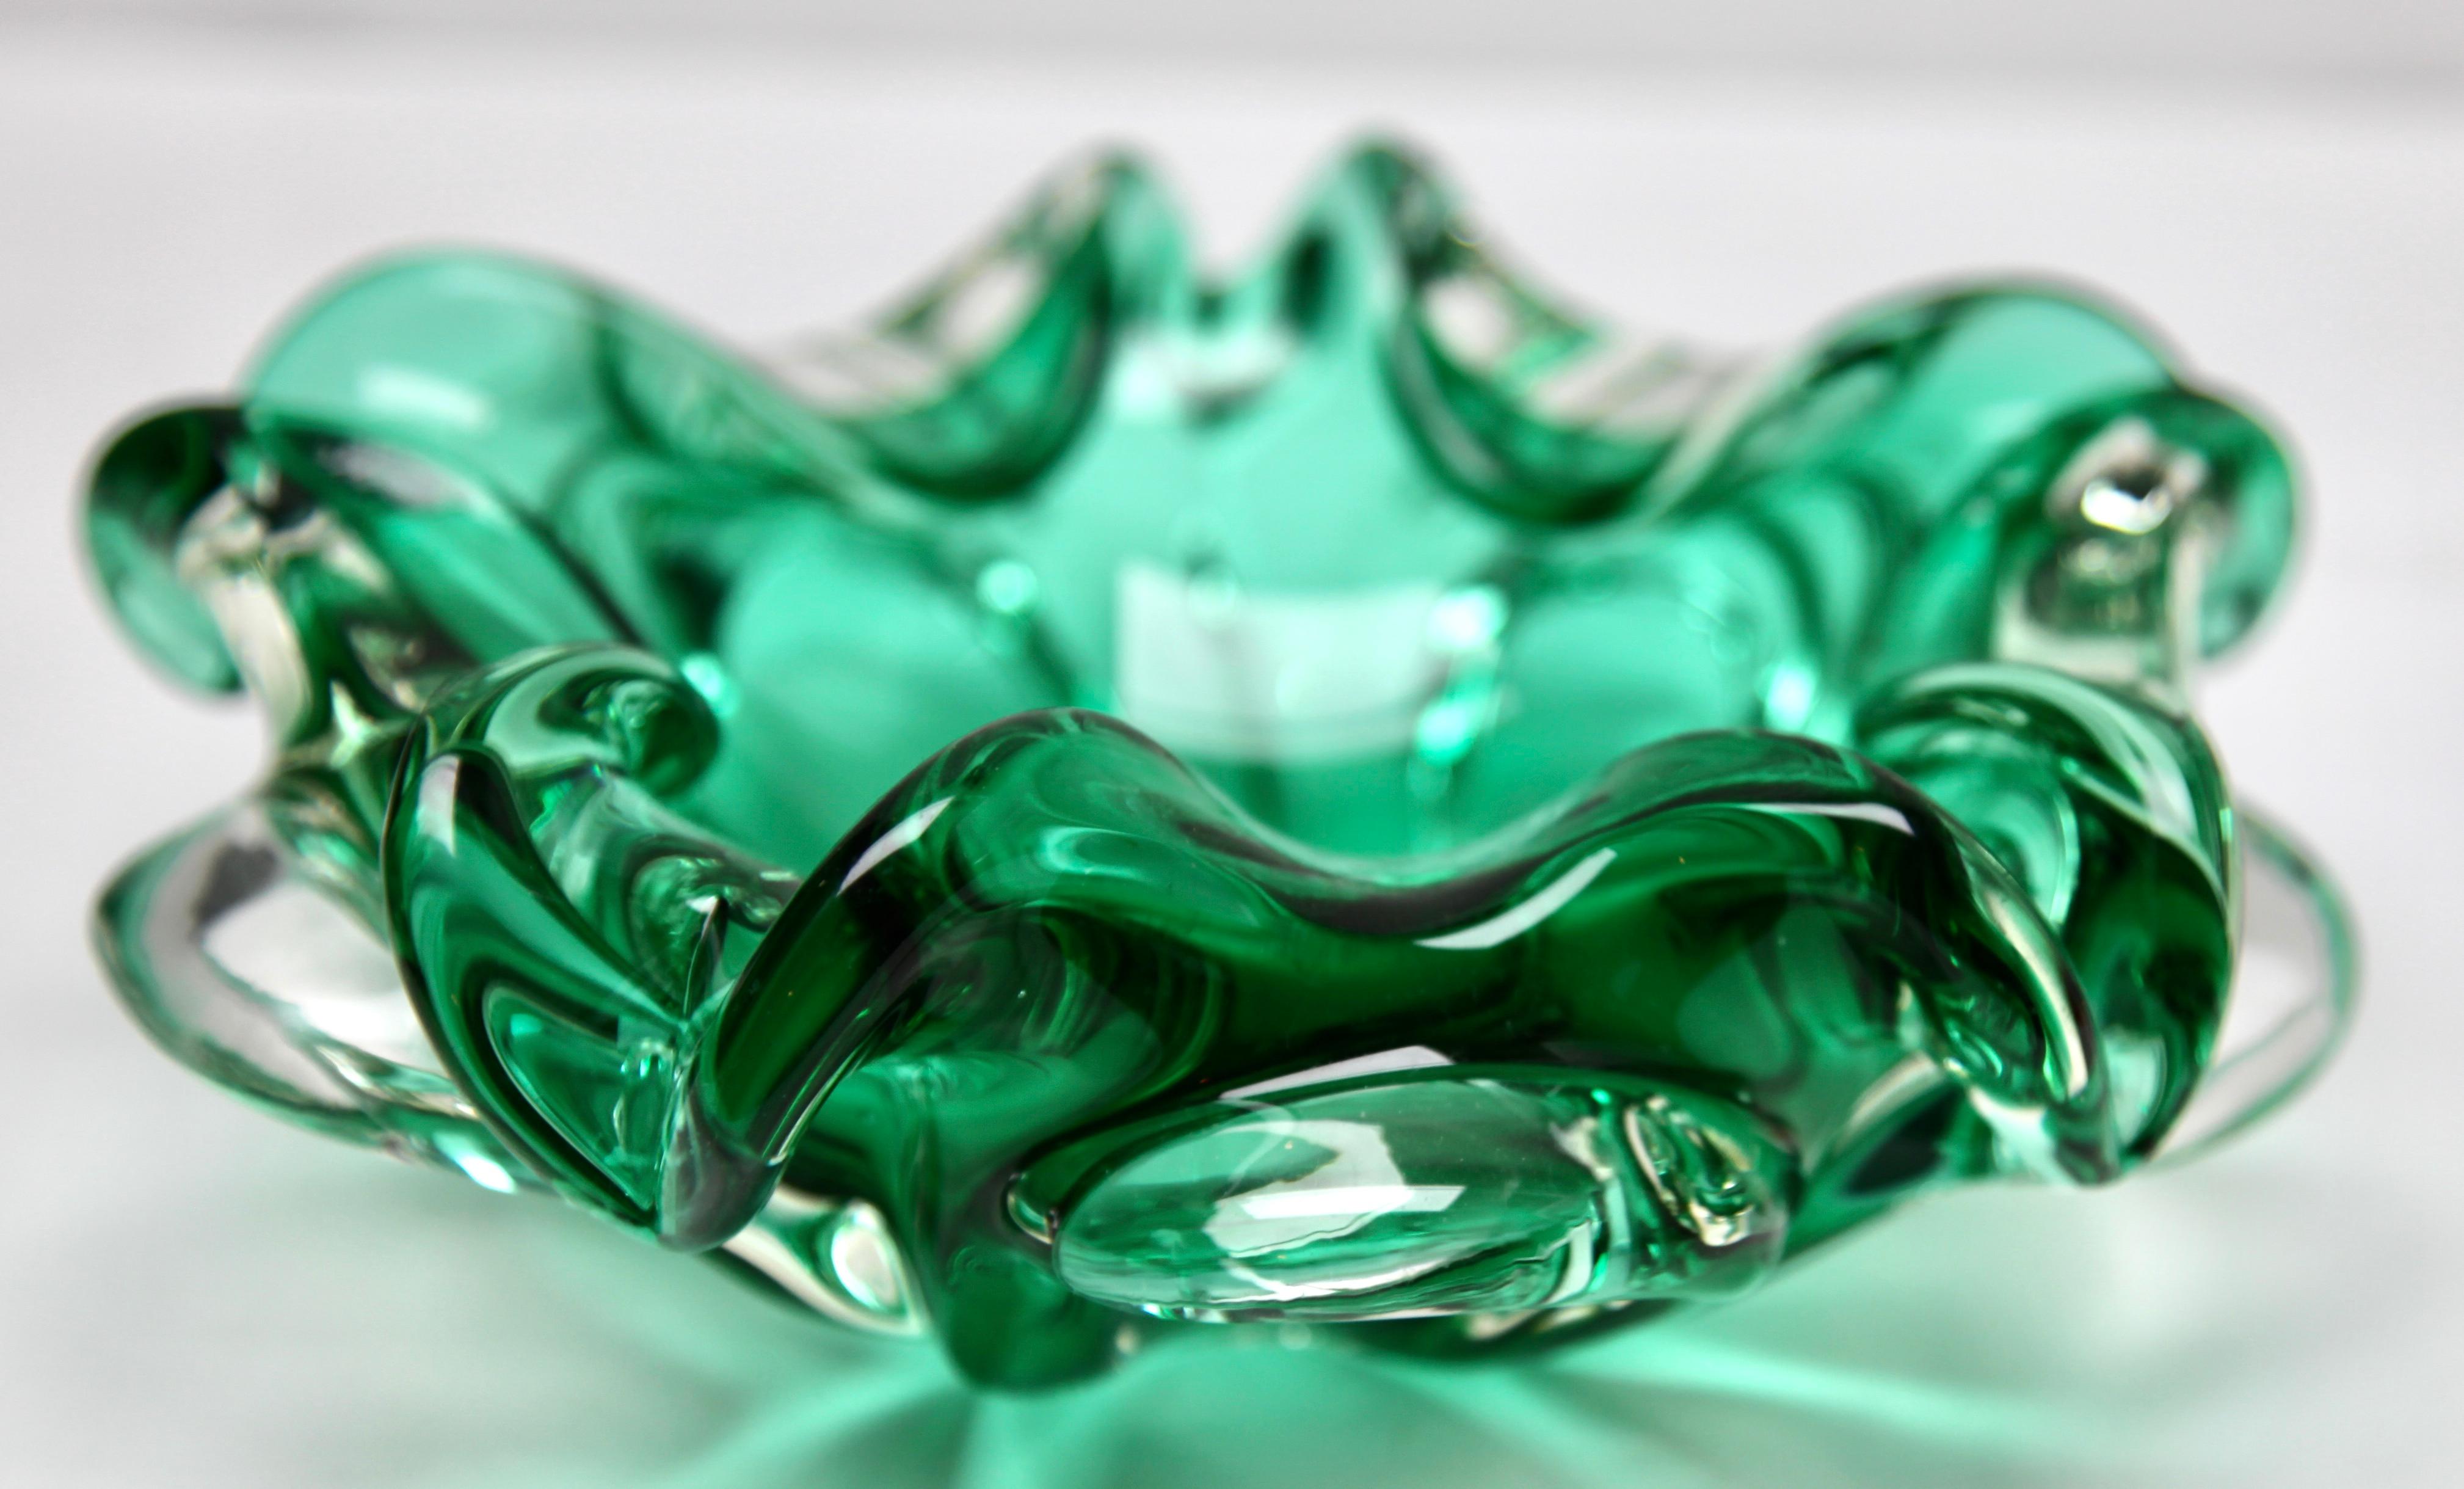 Murano glass biomorphic ruffled edge bowl made in Italy.
Rare Murano handblown iridescent surface green art glass flared rim ribbed bowl.

The piece is in excellent condition and a real beauty!



